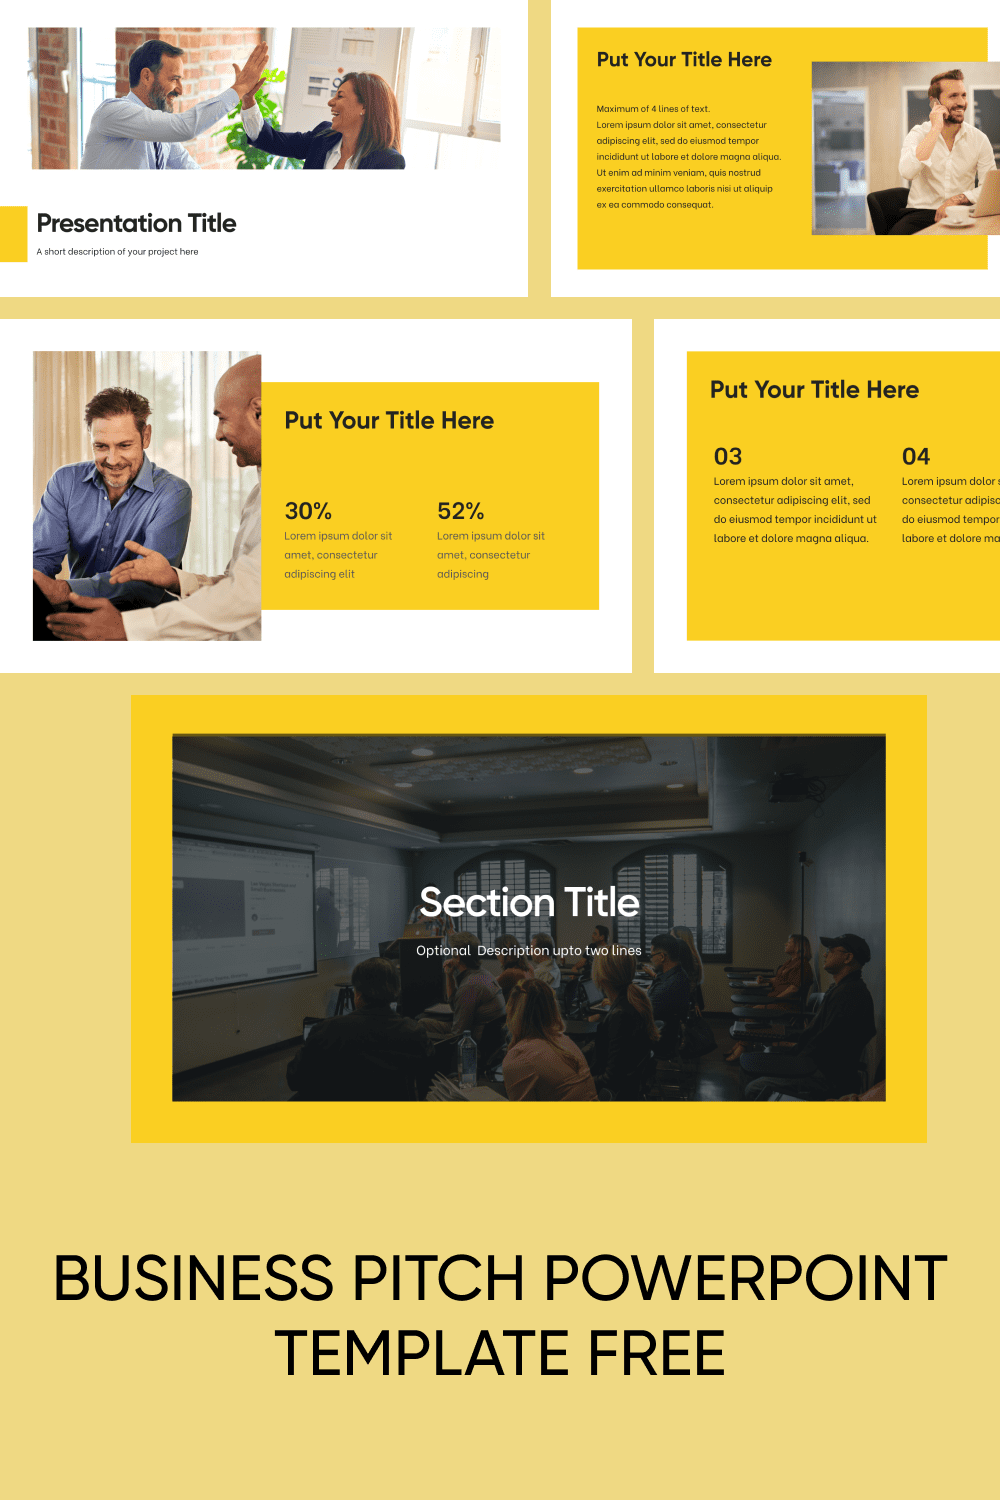 Pinterest Business Pitch Powerpoint Template Free.